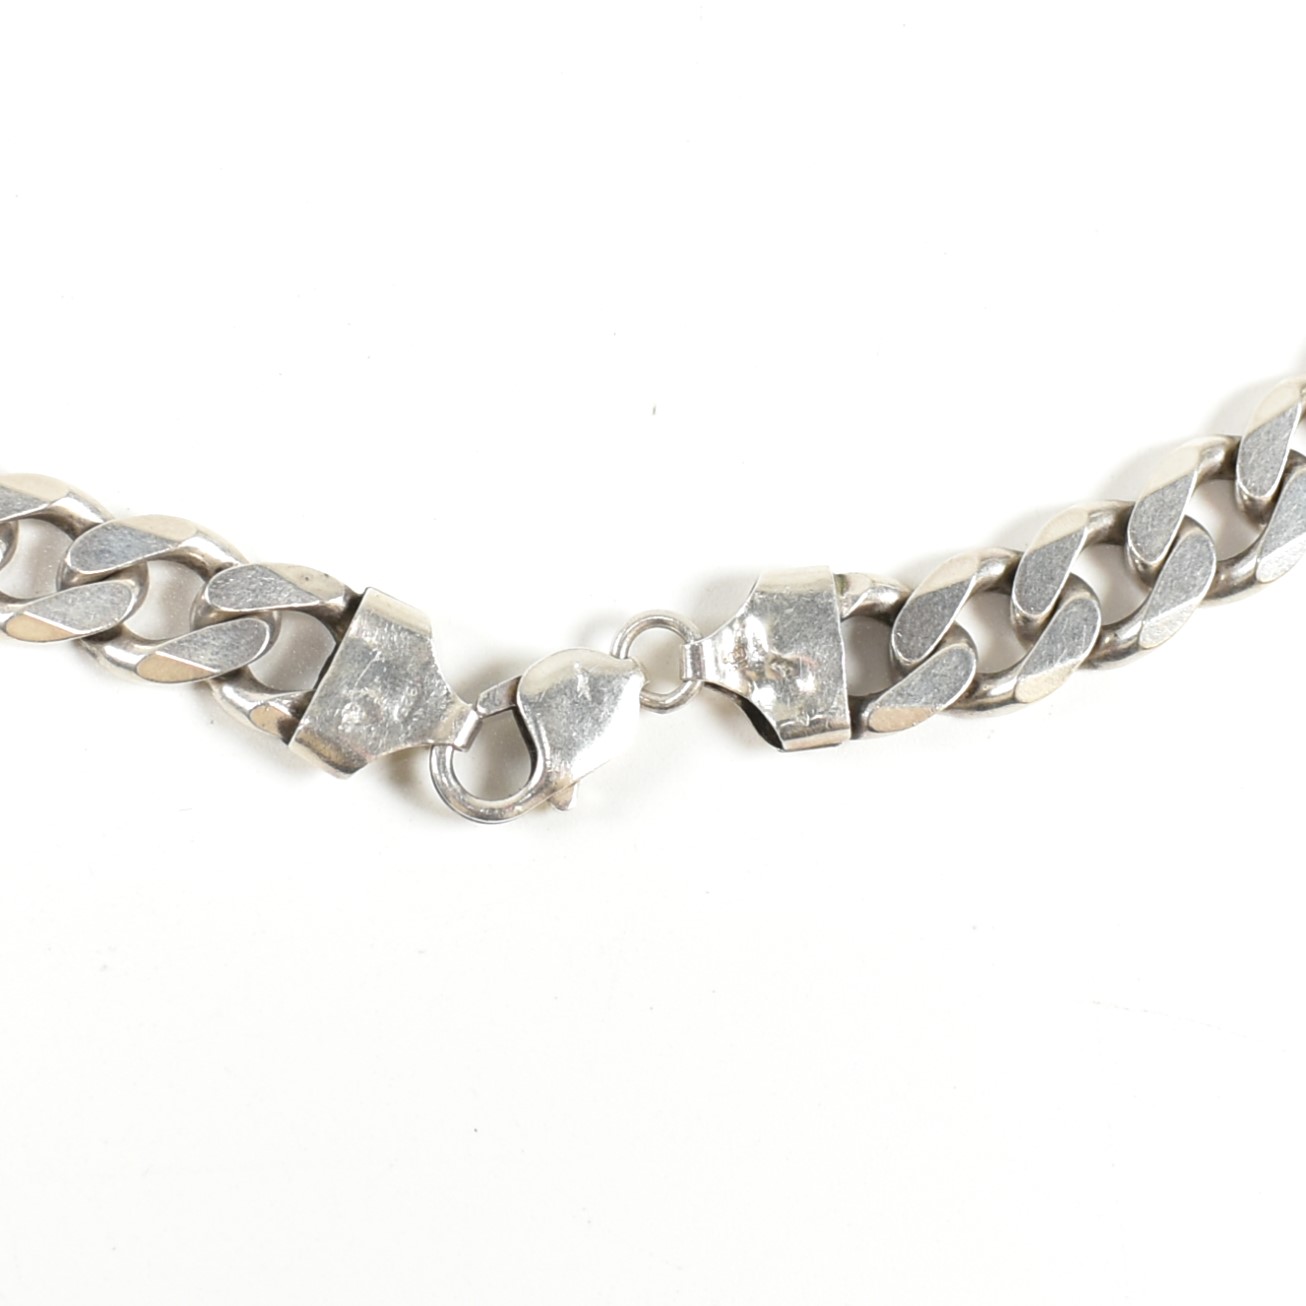 ITALIAN HALLMARKED SILVER CURB LINK CHAIN NECKLACE - Image 3 of 4